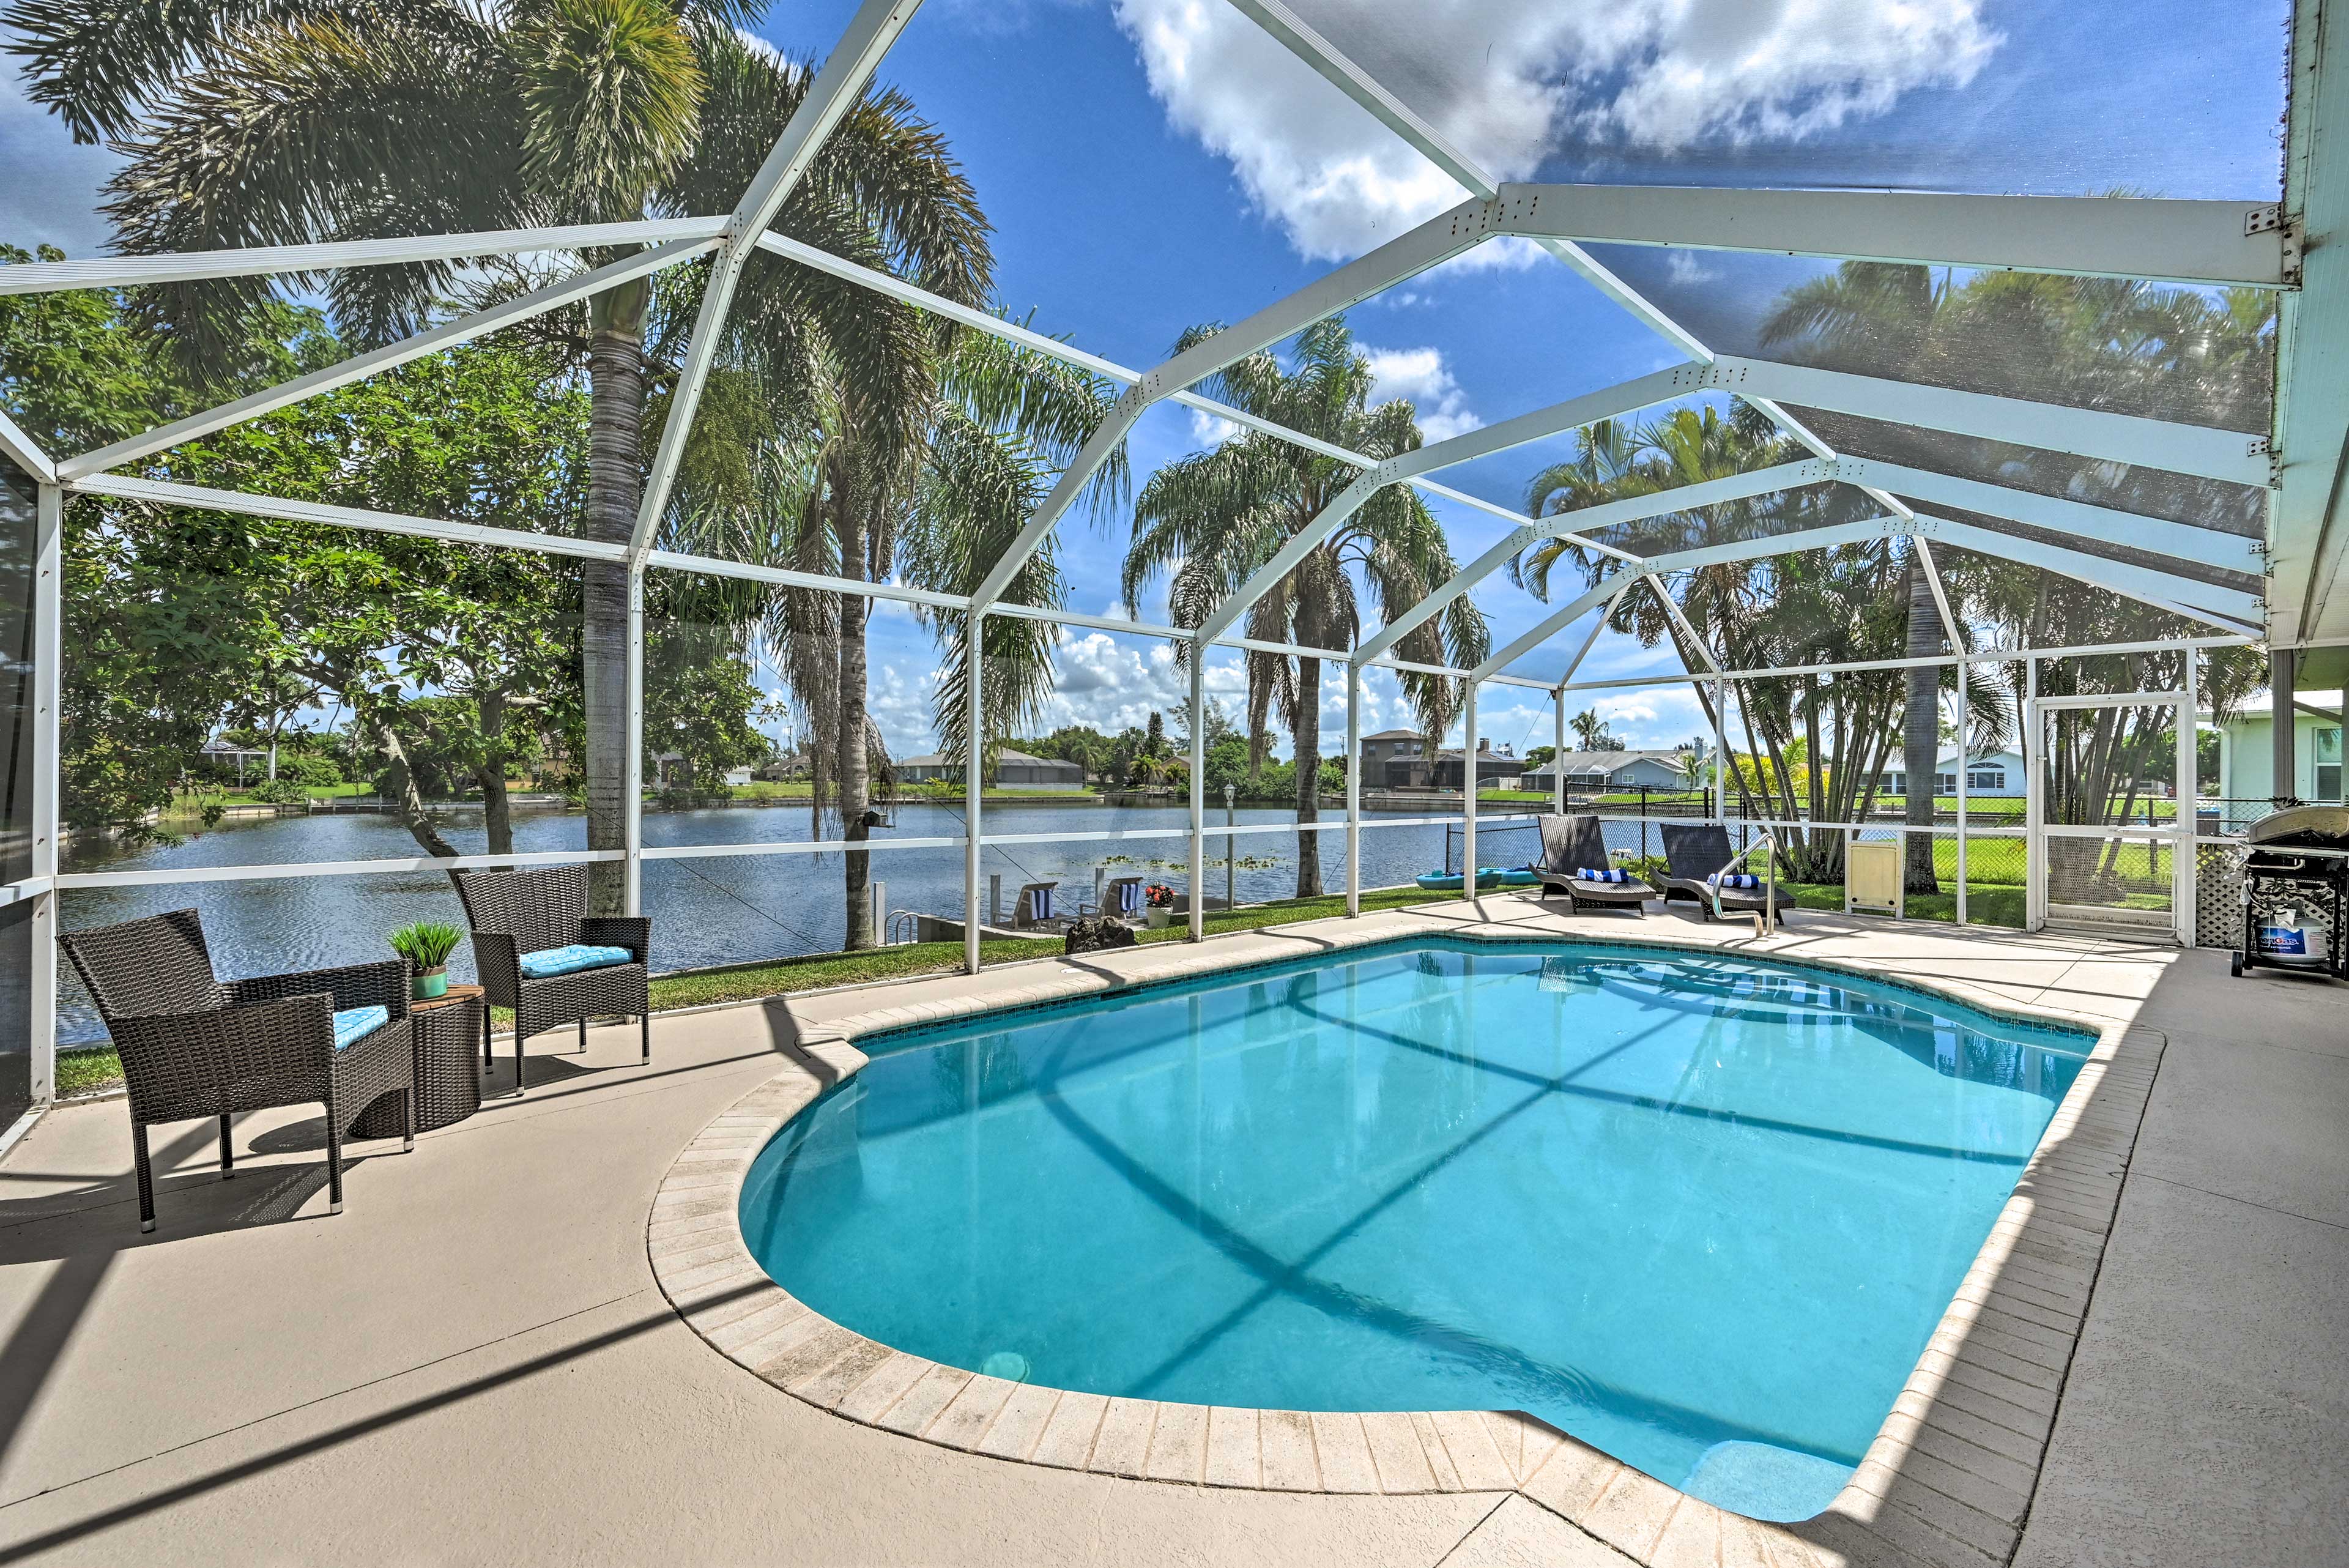 Property Image 1 - Canalfront Cape Coral Escape: Pool, Dock, & Kayaks